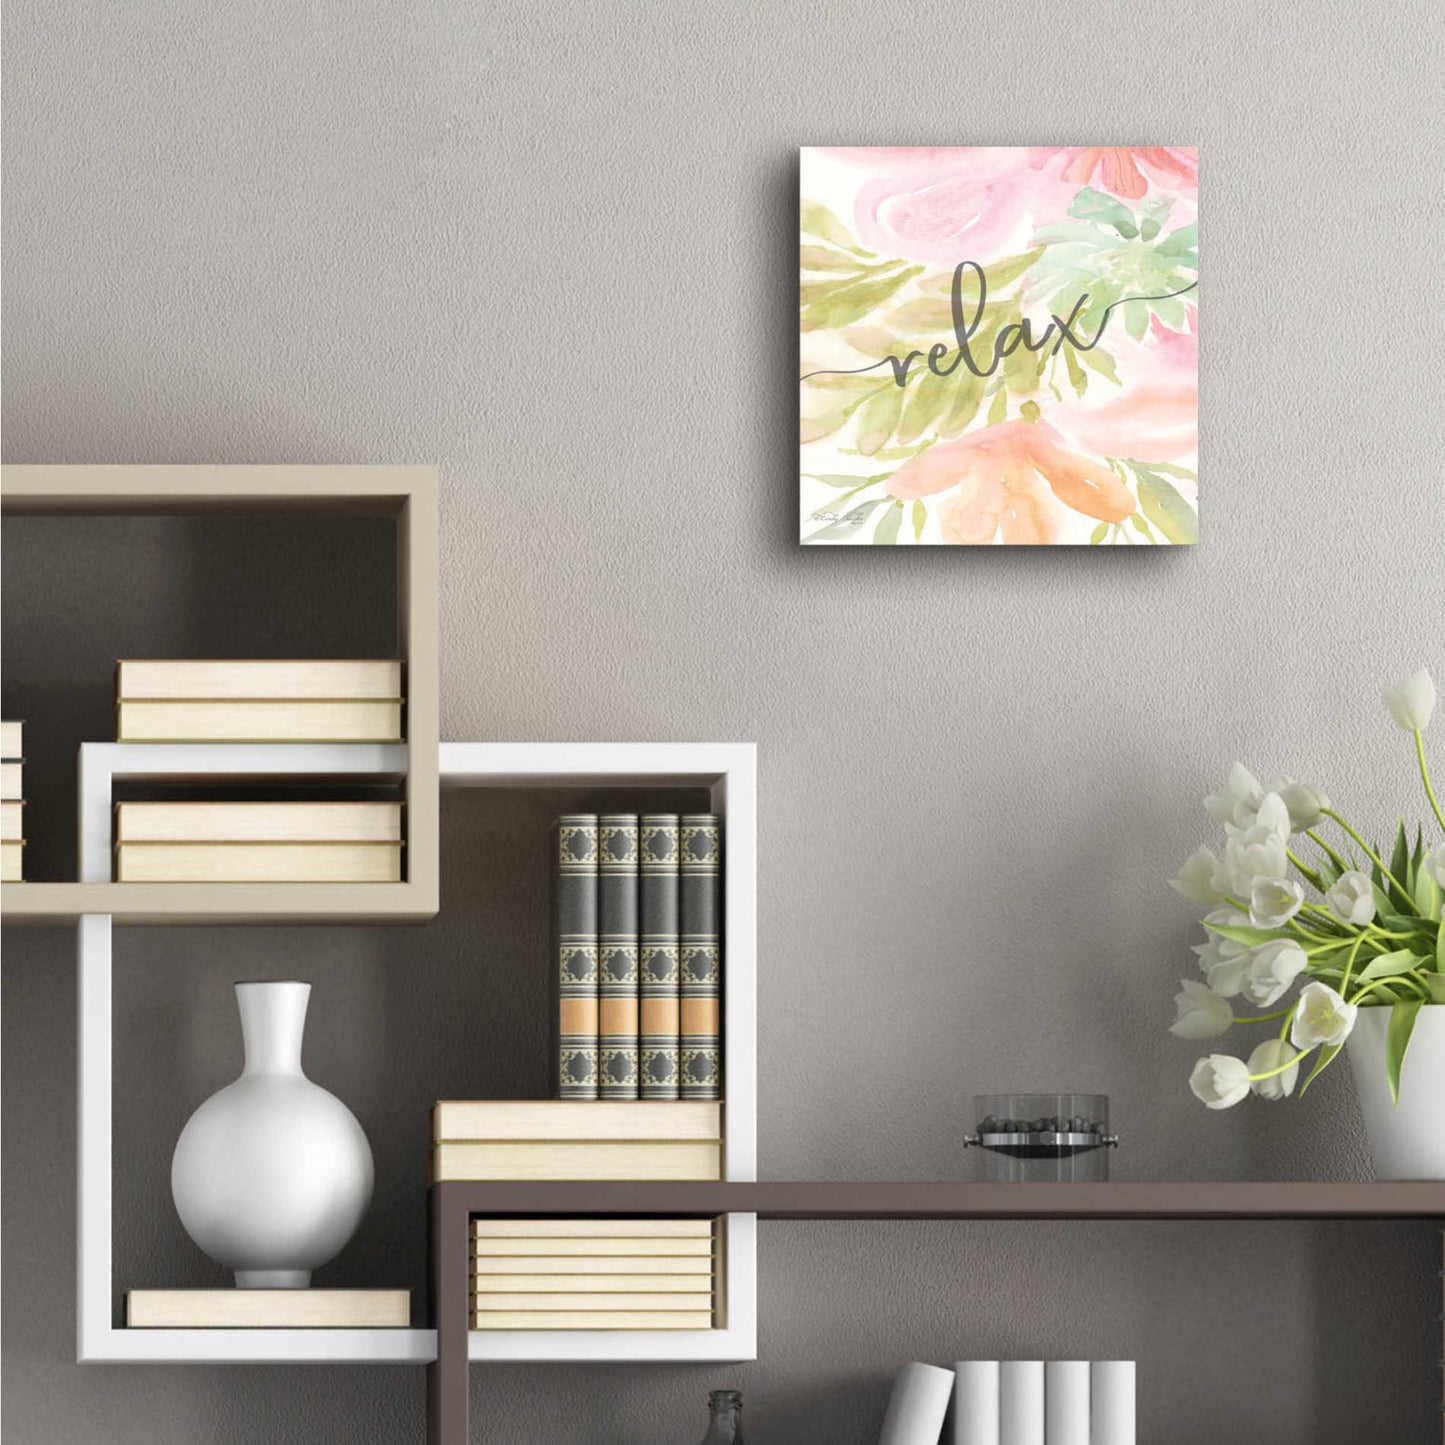 Epic Art 'Floral Relax' by Cindy Jacobs, Acrylic Glass Wall Art,12x12